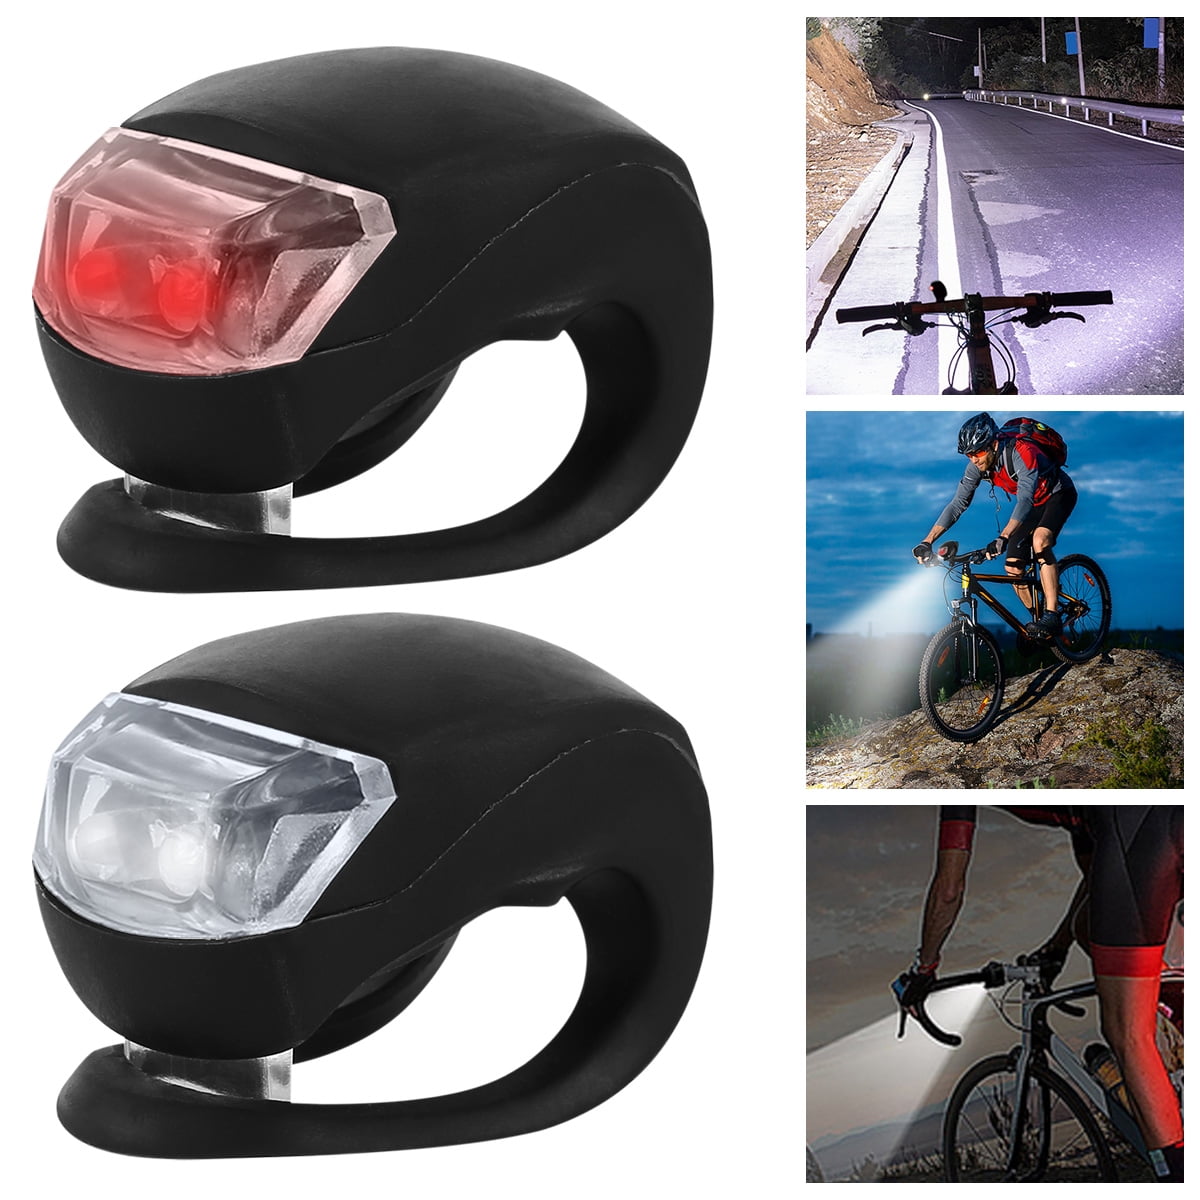 Bike Headlight and Taillight,Waterproof & Safety Road,Mountain Bike Lights,Batteries Included,2 Pack Bicycle Light Front and Rear Silicone LED Bike Light Set